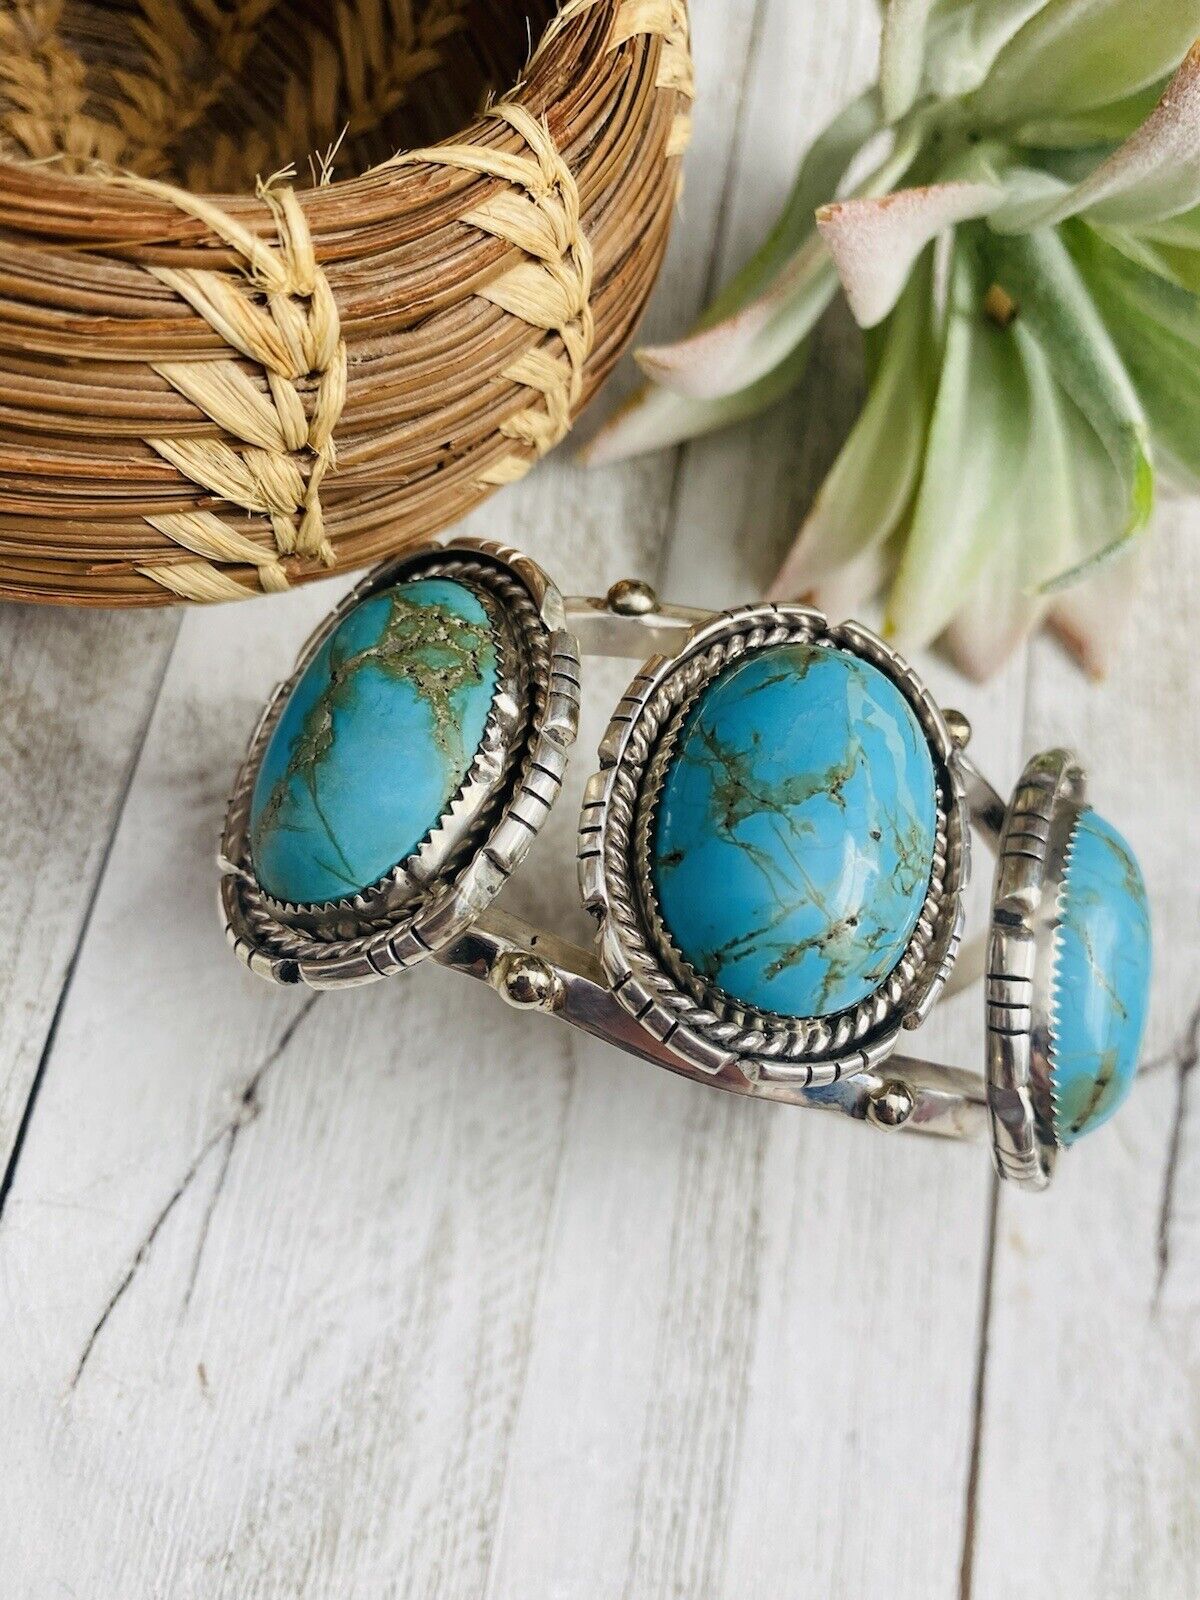 Vintage Turquoise Row Cuff - Four Winds Gallery